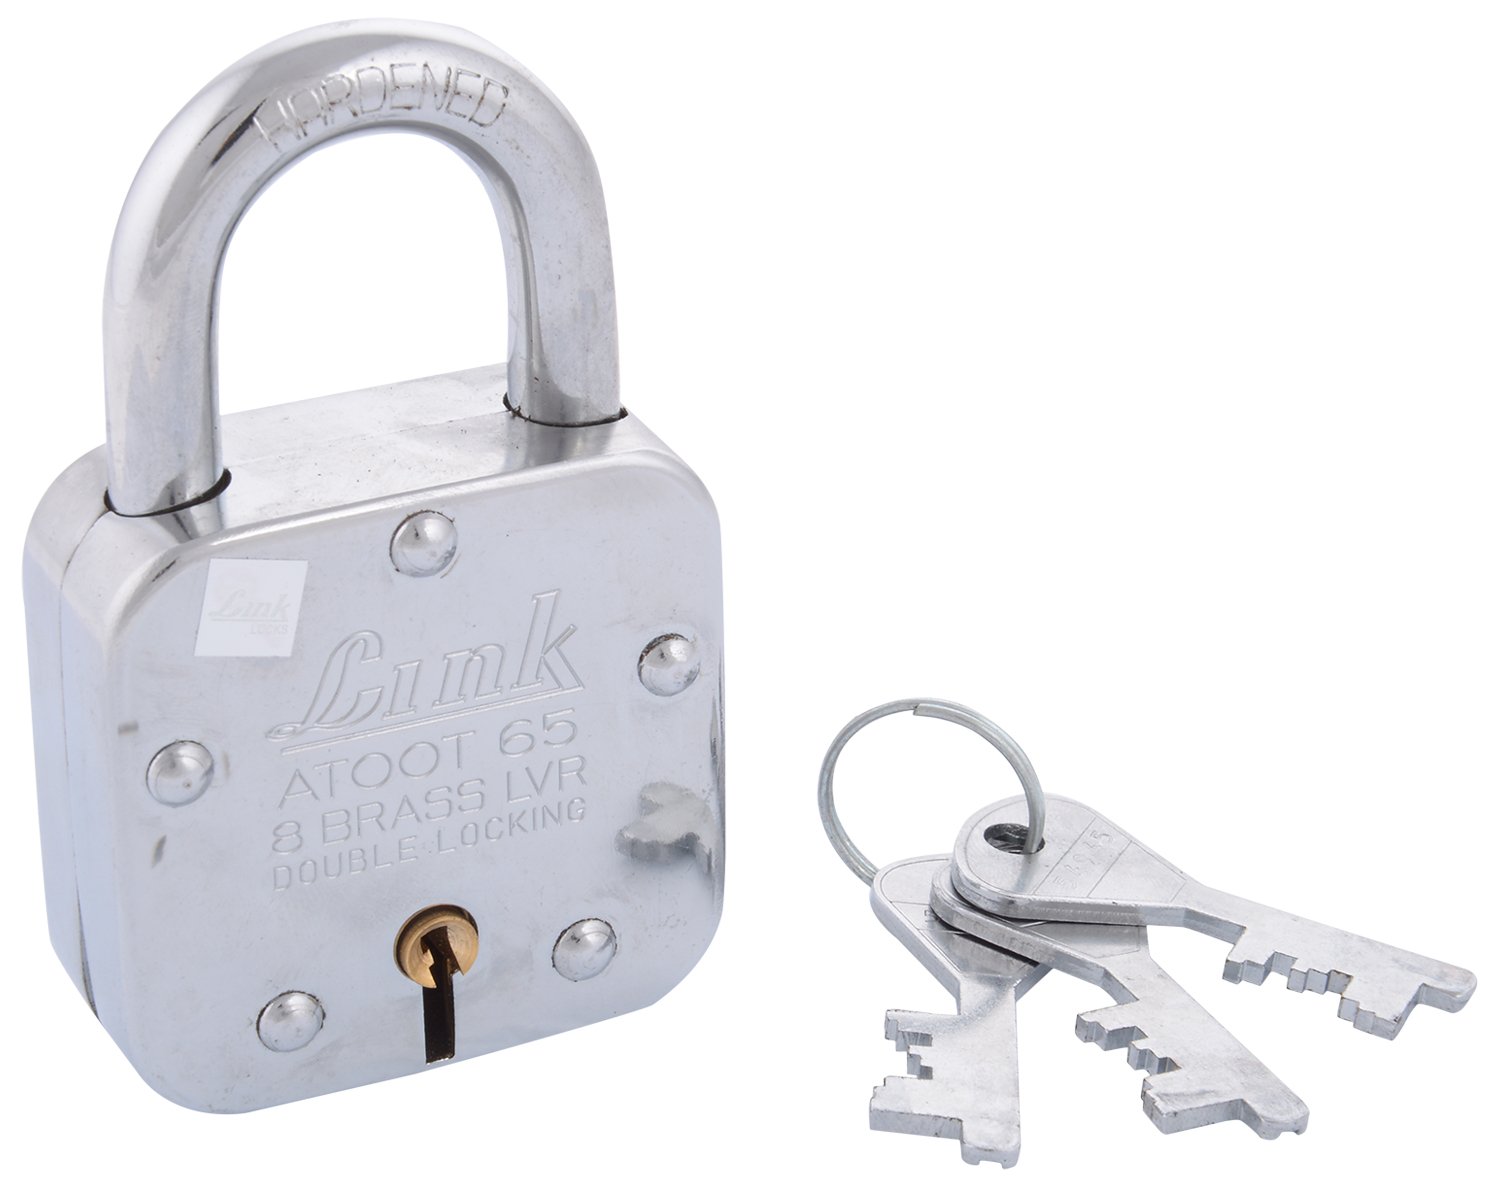 Link PAD LOCK PT Series PT 60 in Vellore at best price by Key World -  Justdial